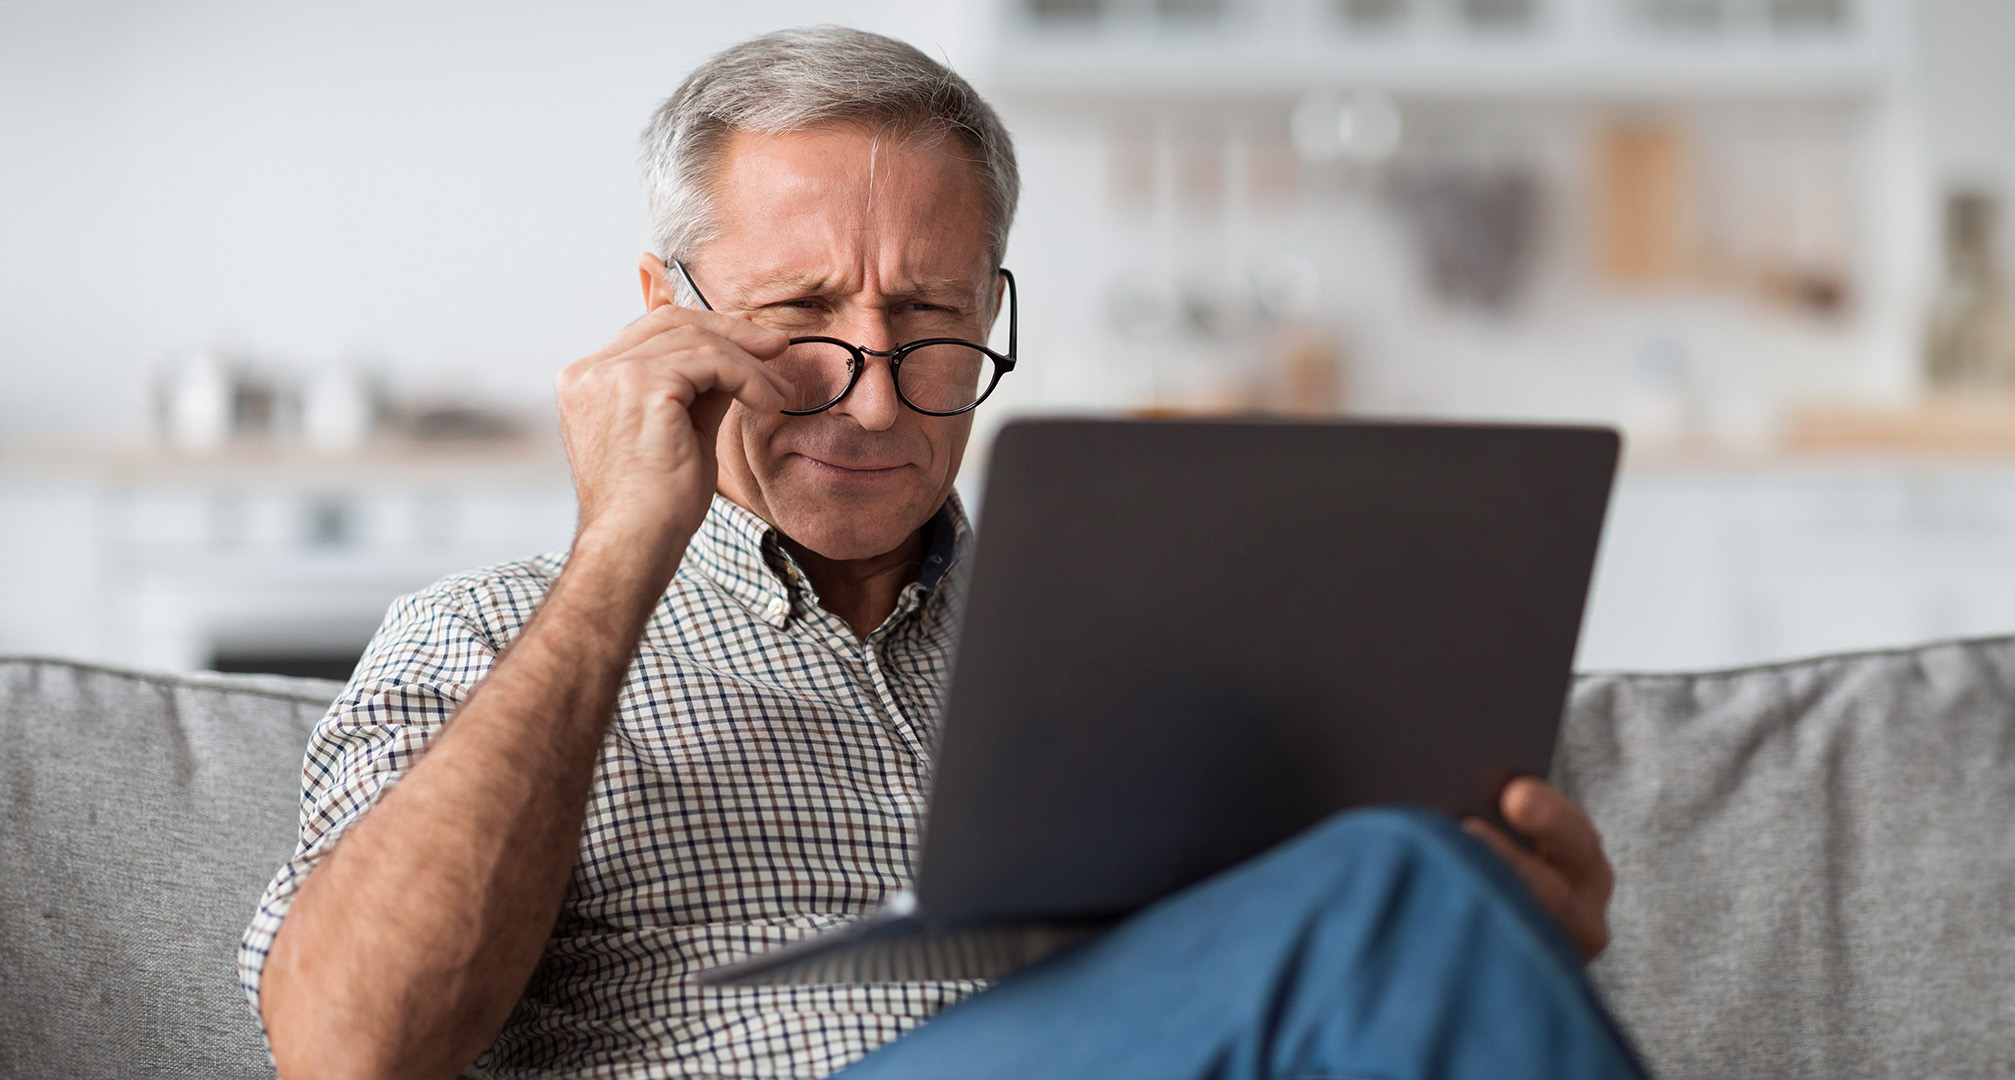 person wearing glasses and squinting at laptop